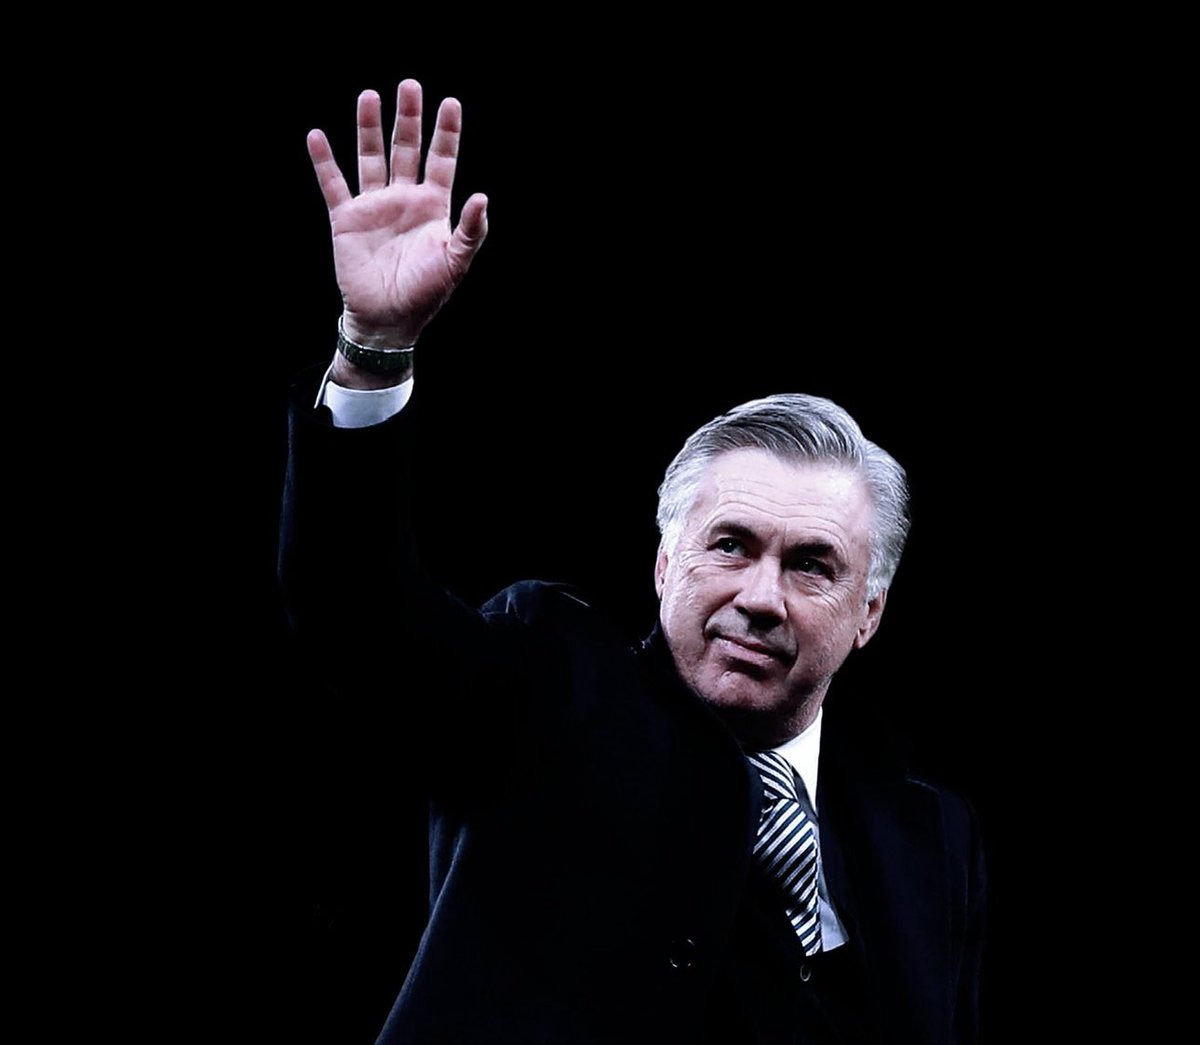 Ancelotti deserves so much praise. We didn’t replace his Number 9, 3 ACLs to 3 crucial player’s defensively and had to manage countless other injuries throughout. Despite all the ‘excuses’, he got on with it and put together one of the best La Liga Campaigns OAT!